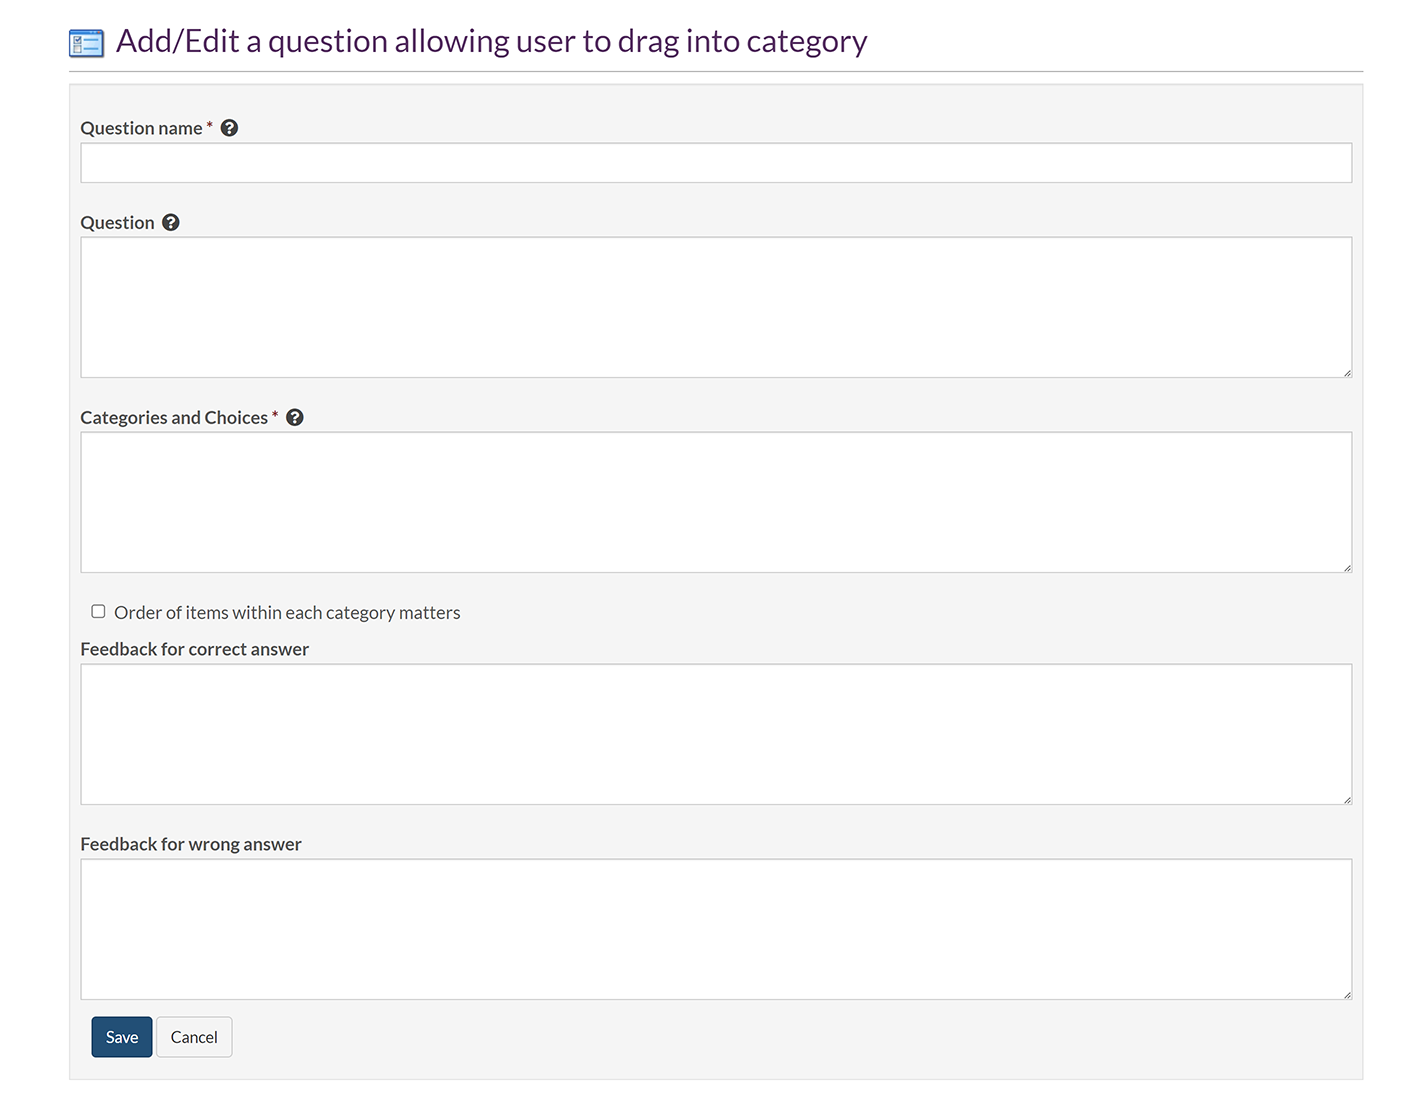 The 'Add/Edit a question type allowing user to drag into category' screen